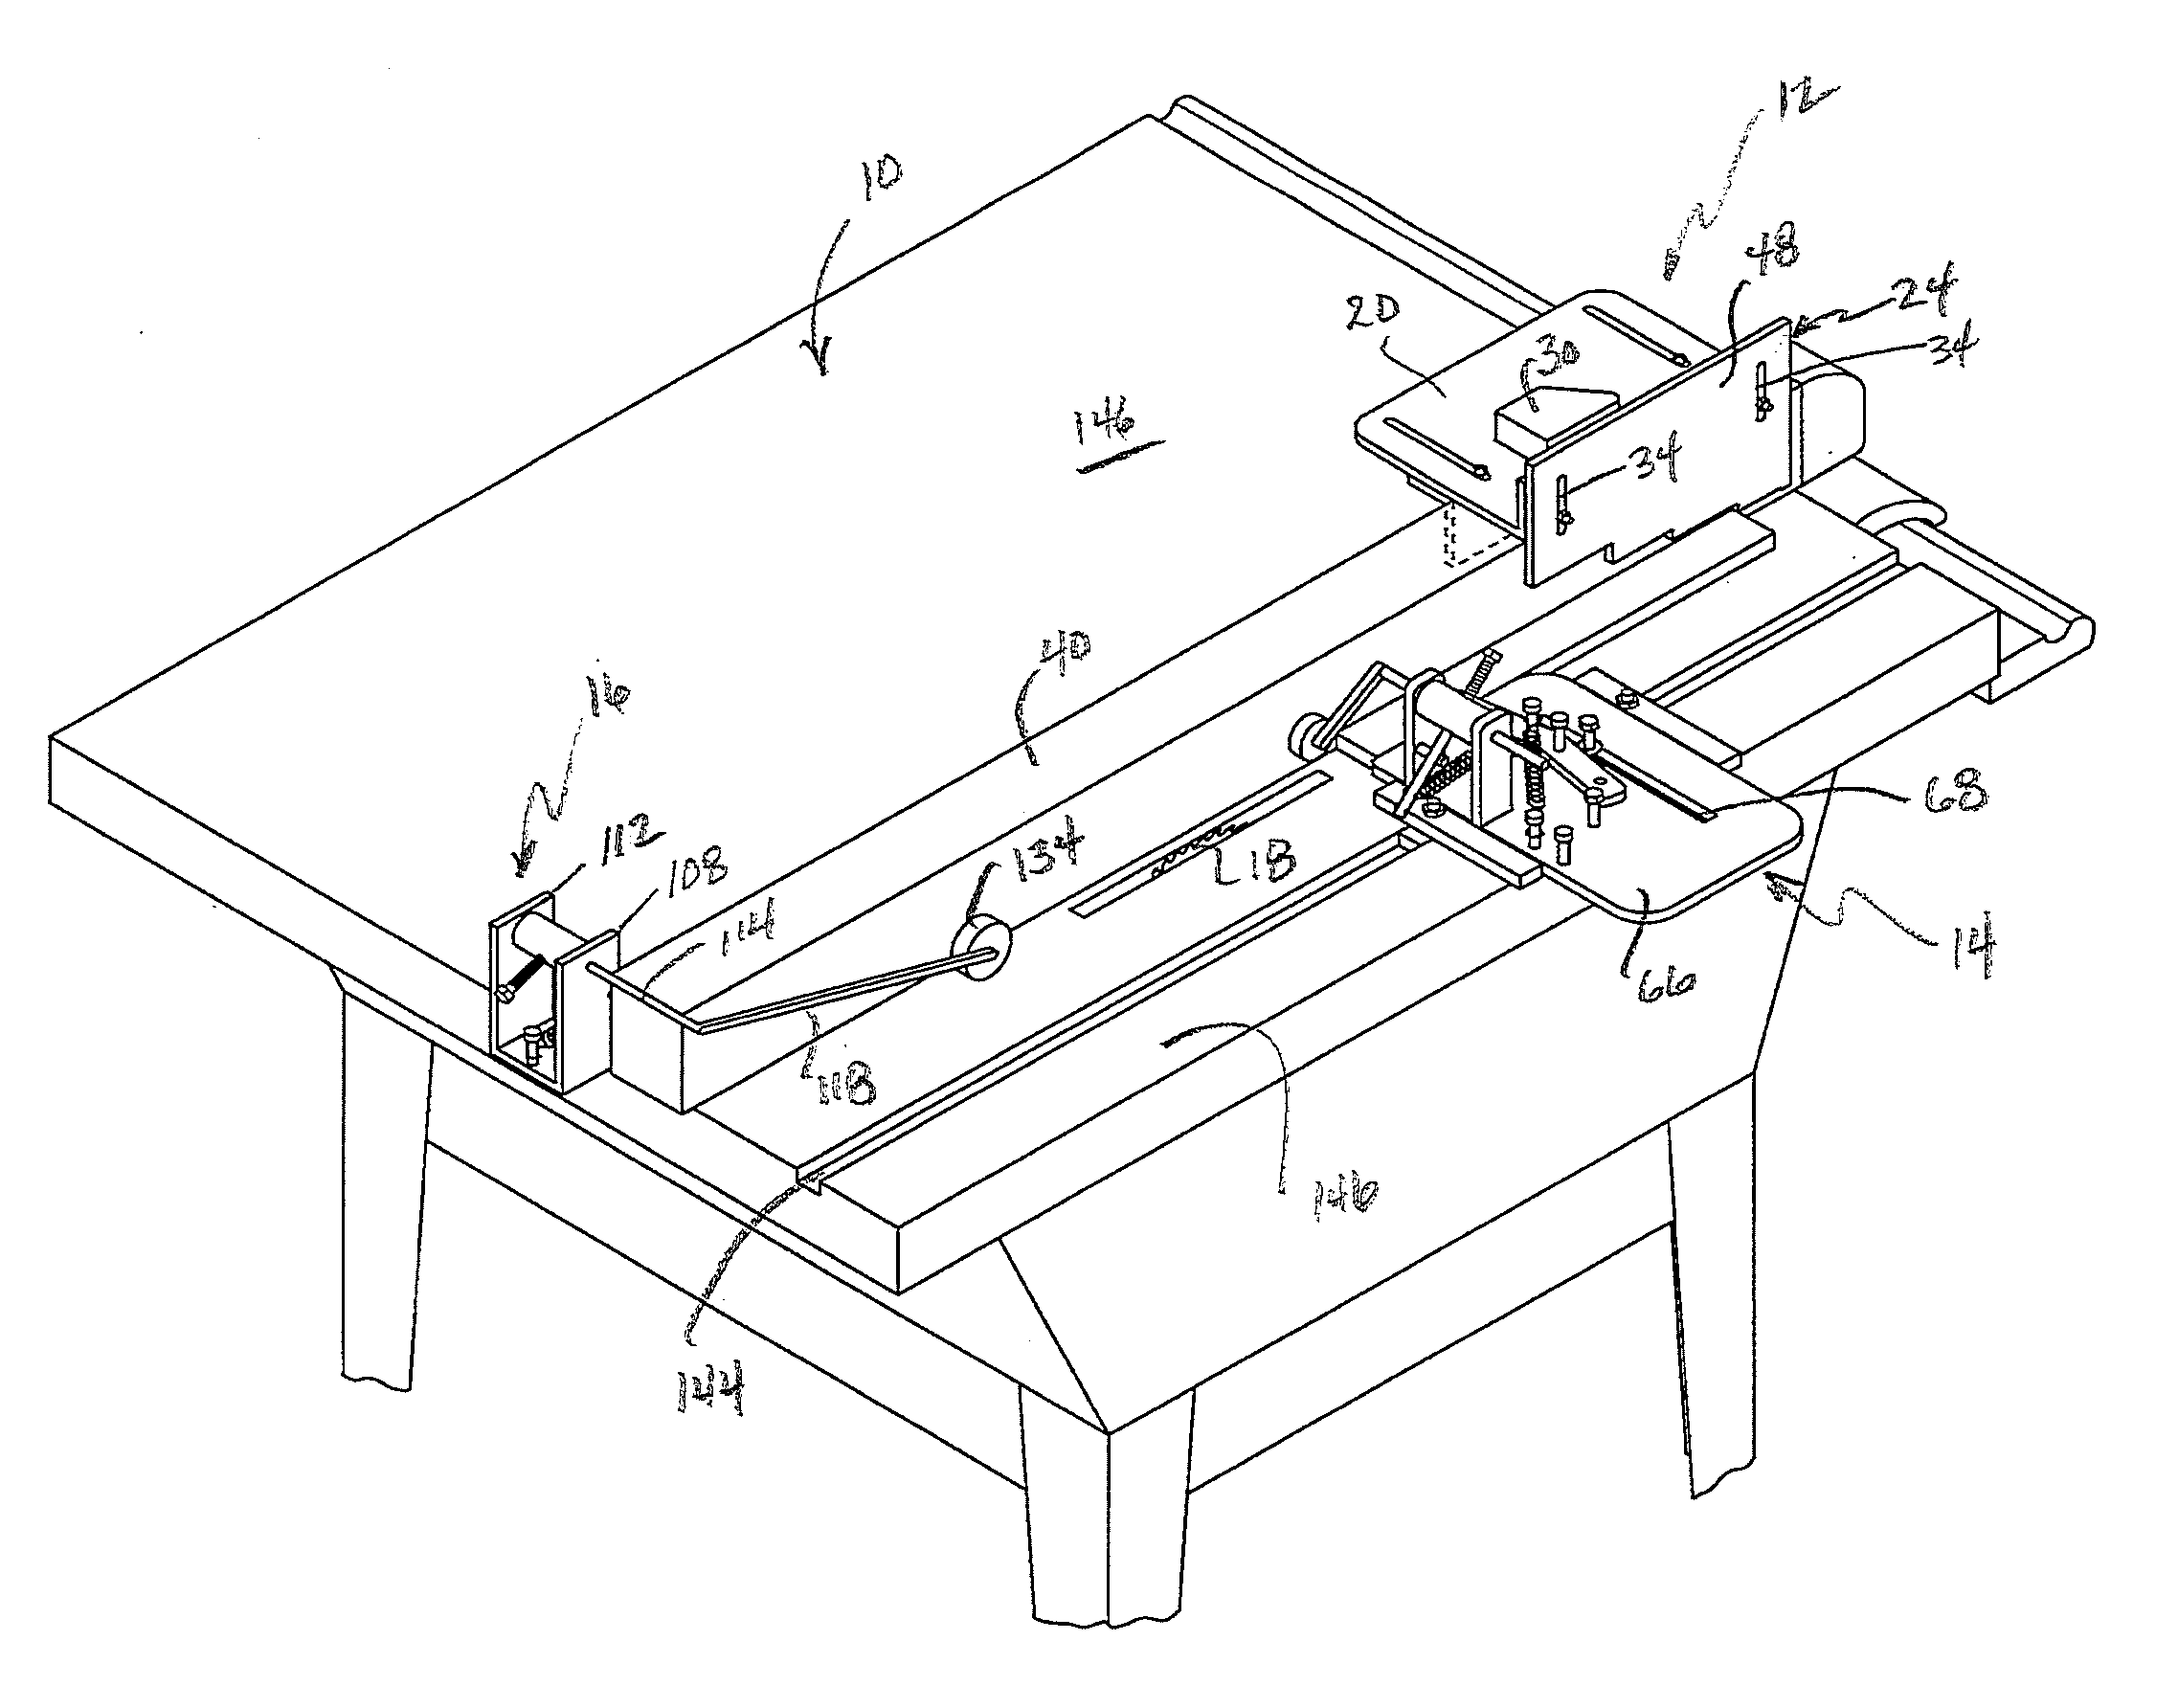 Safety device for table saw